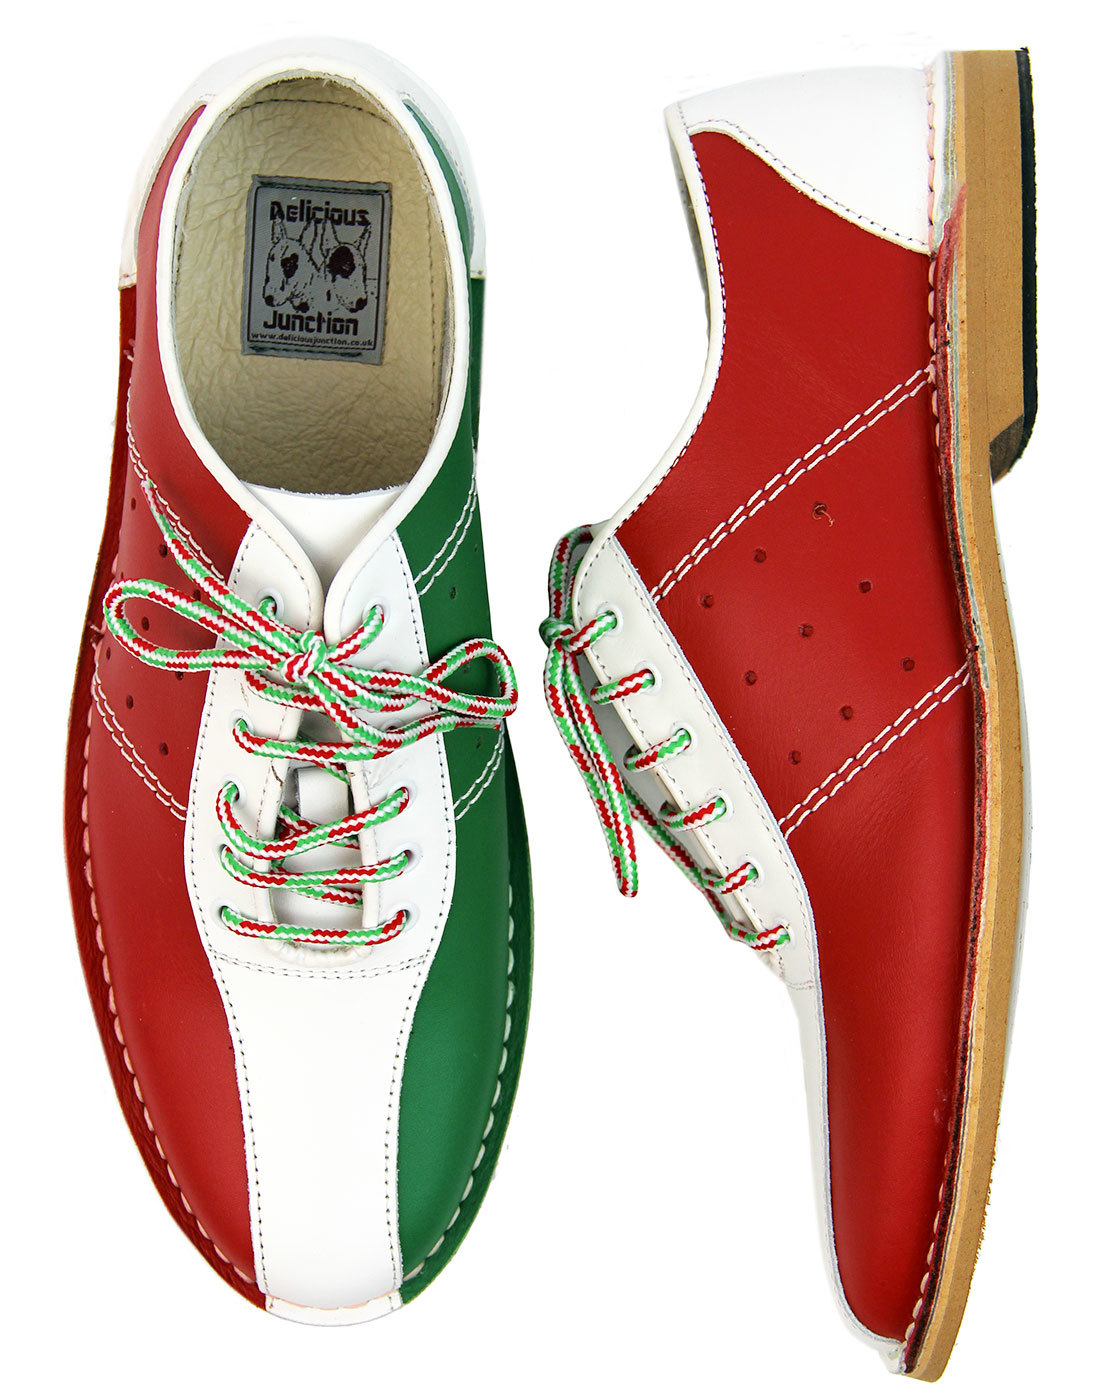 Watts Italia Bowling Shoes | DELICIOUS JUNCTION Retro 60s Mod Shoes